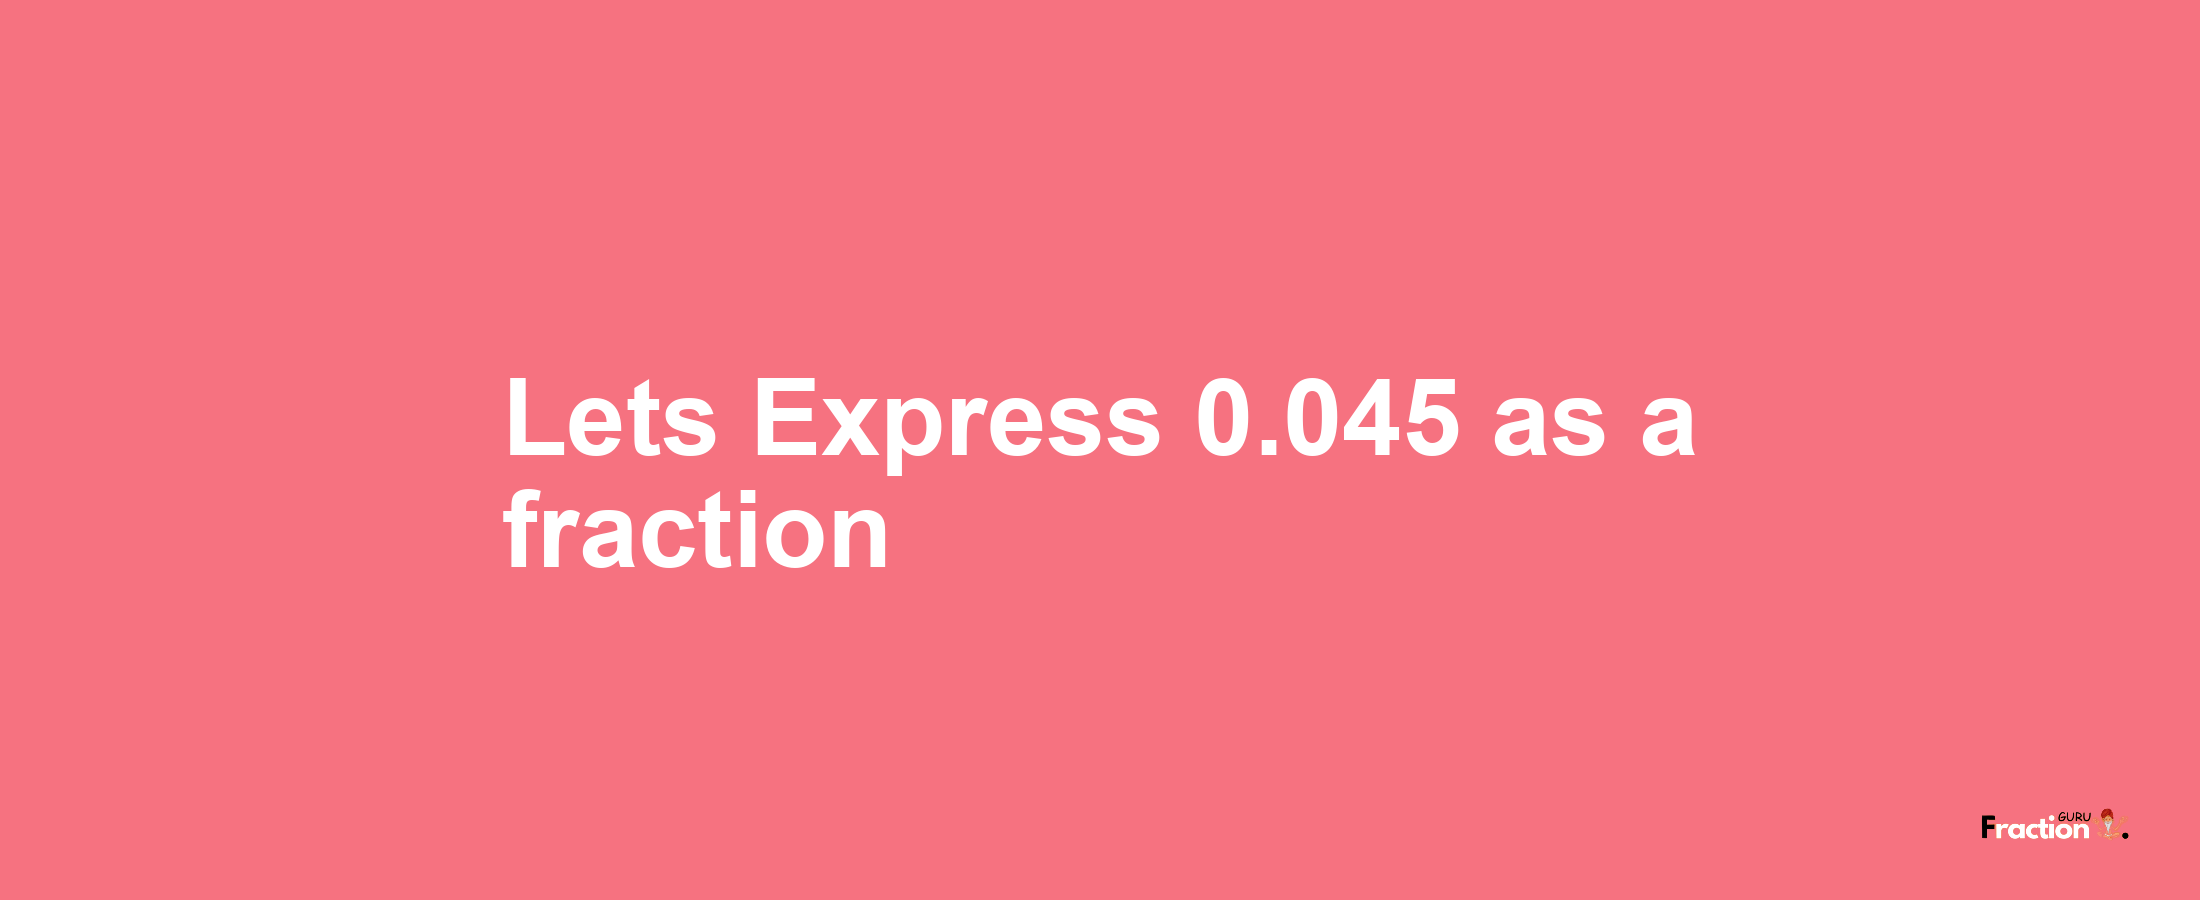 Lets Express 0.045 as afraction